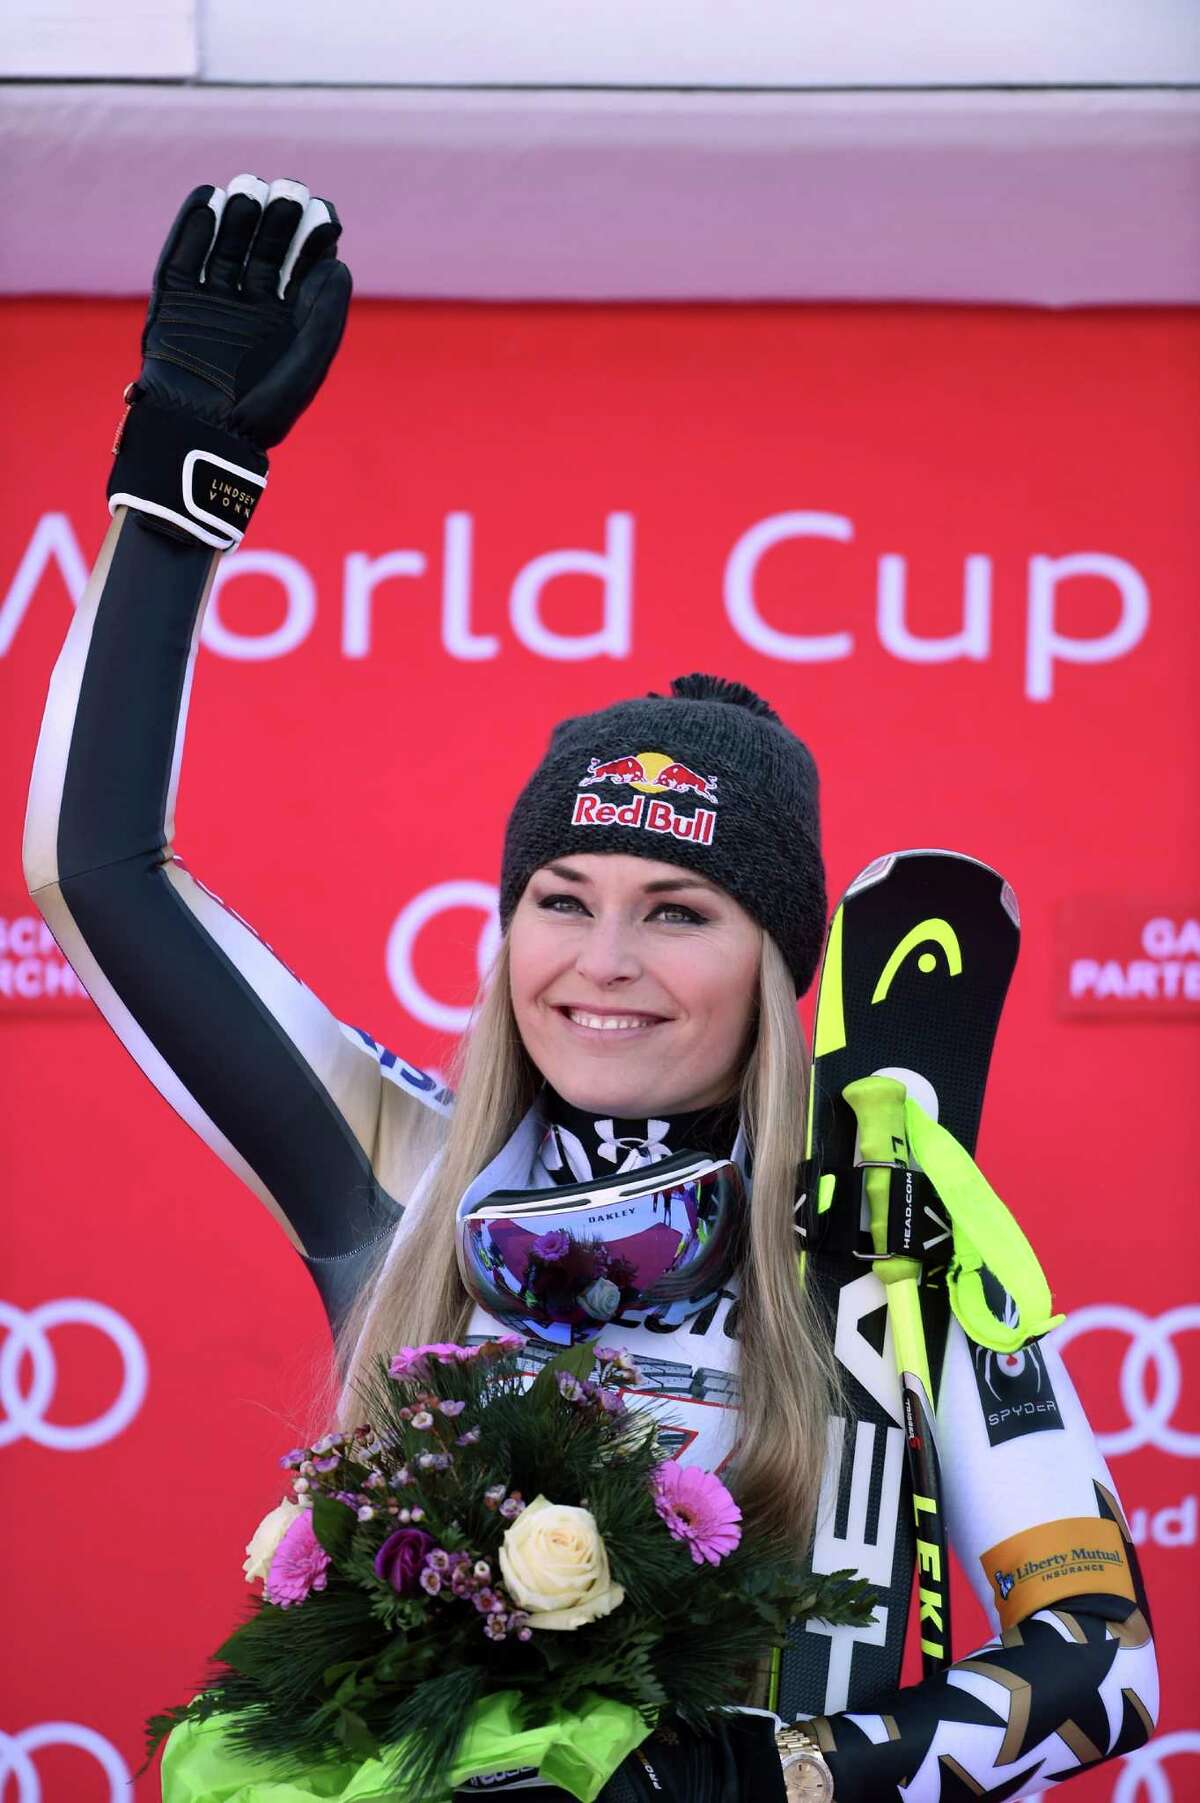 Lindsey Vonn is all smiles after winning Saturday's World Cup downhill race﻿.